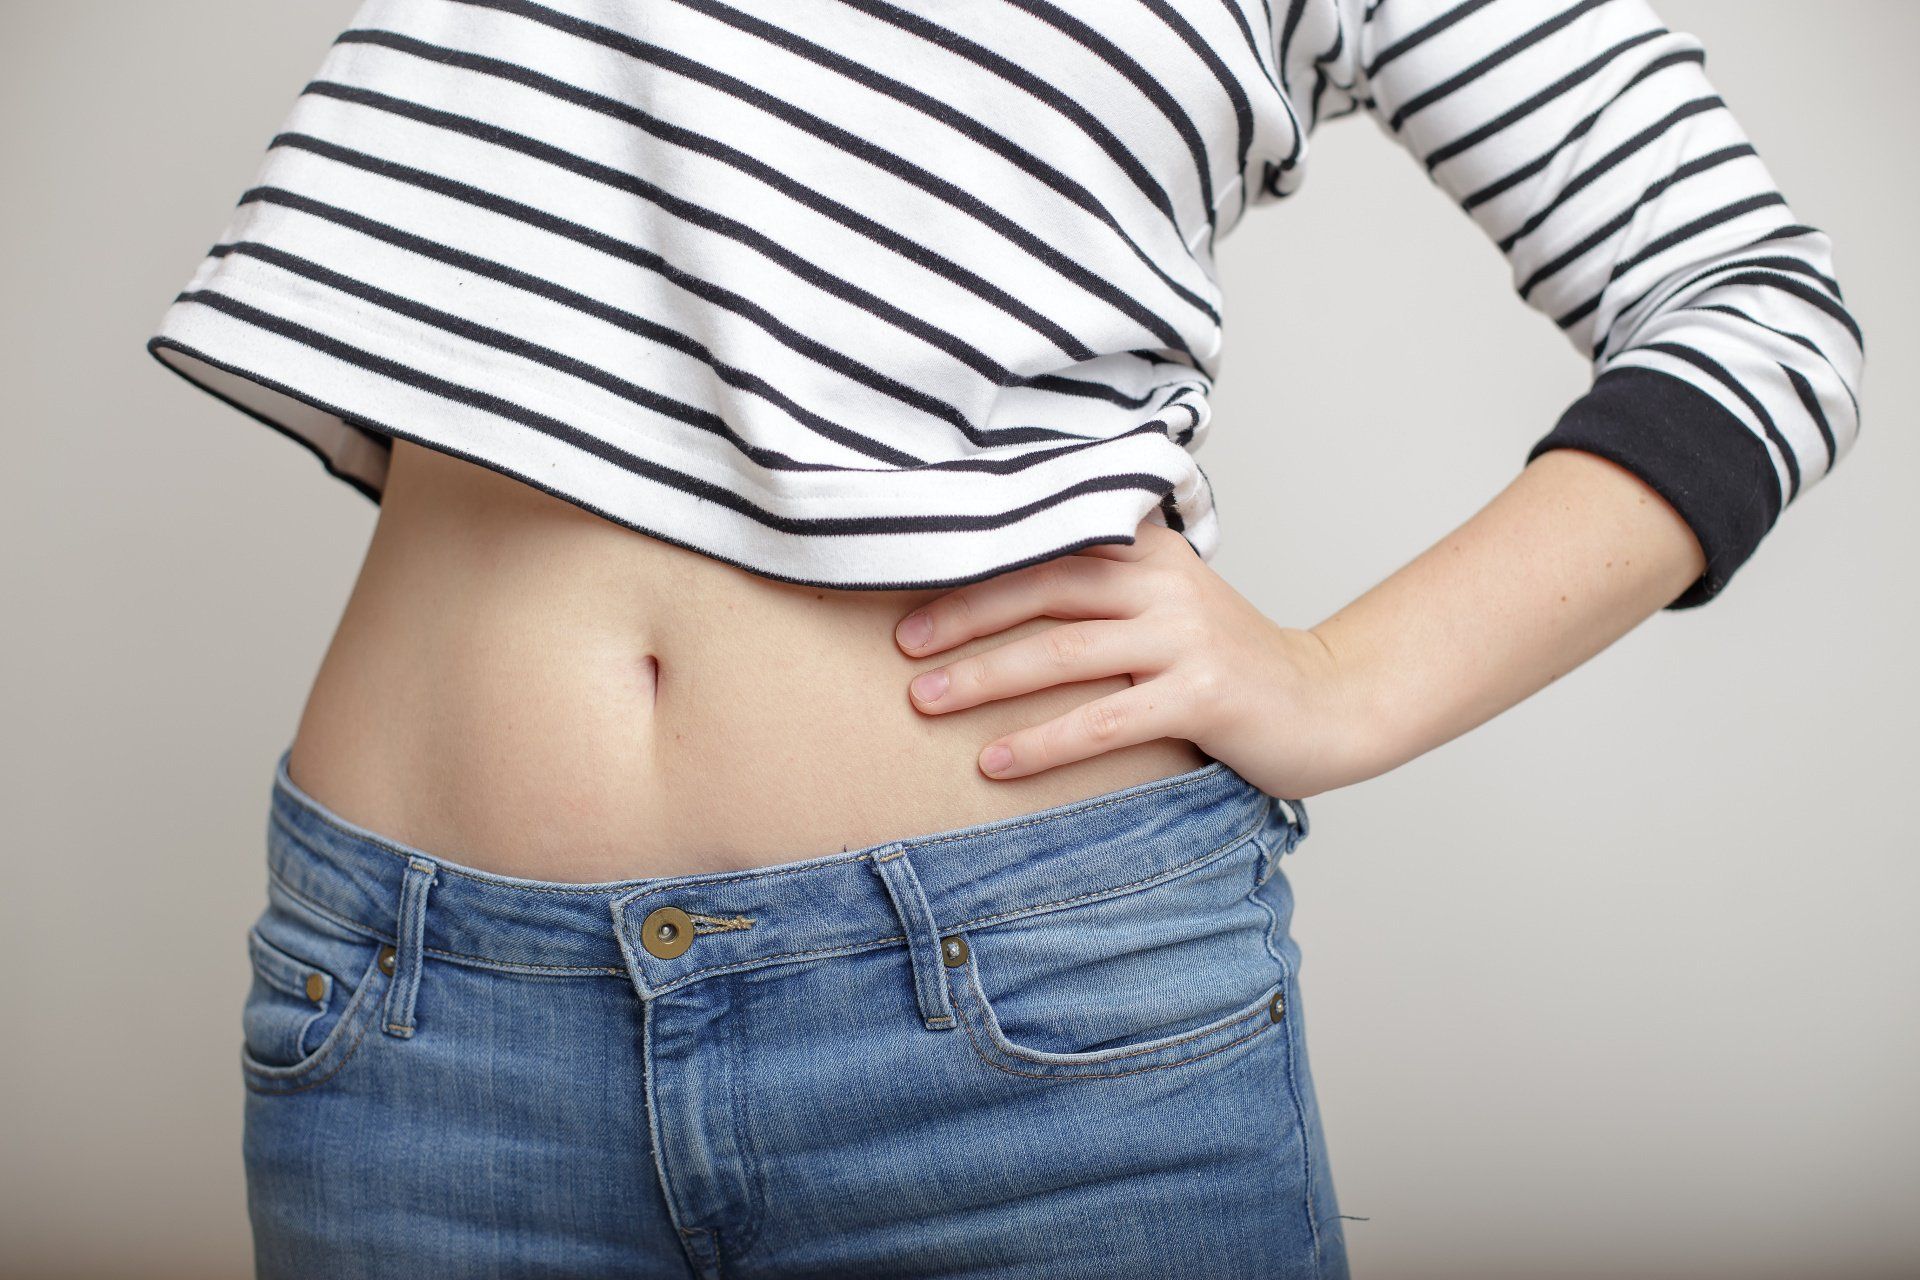 closeup of woman's midriff wearing striped shirt and jeans